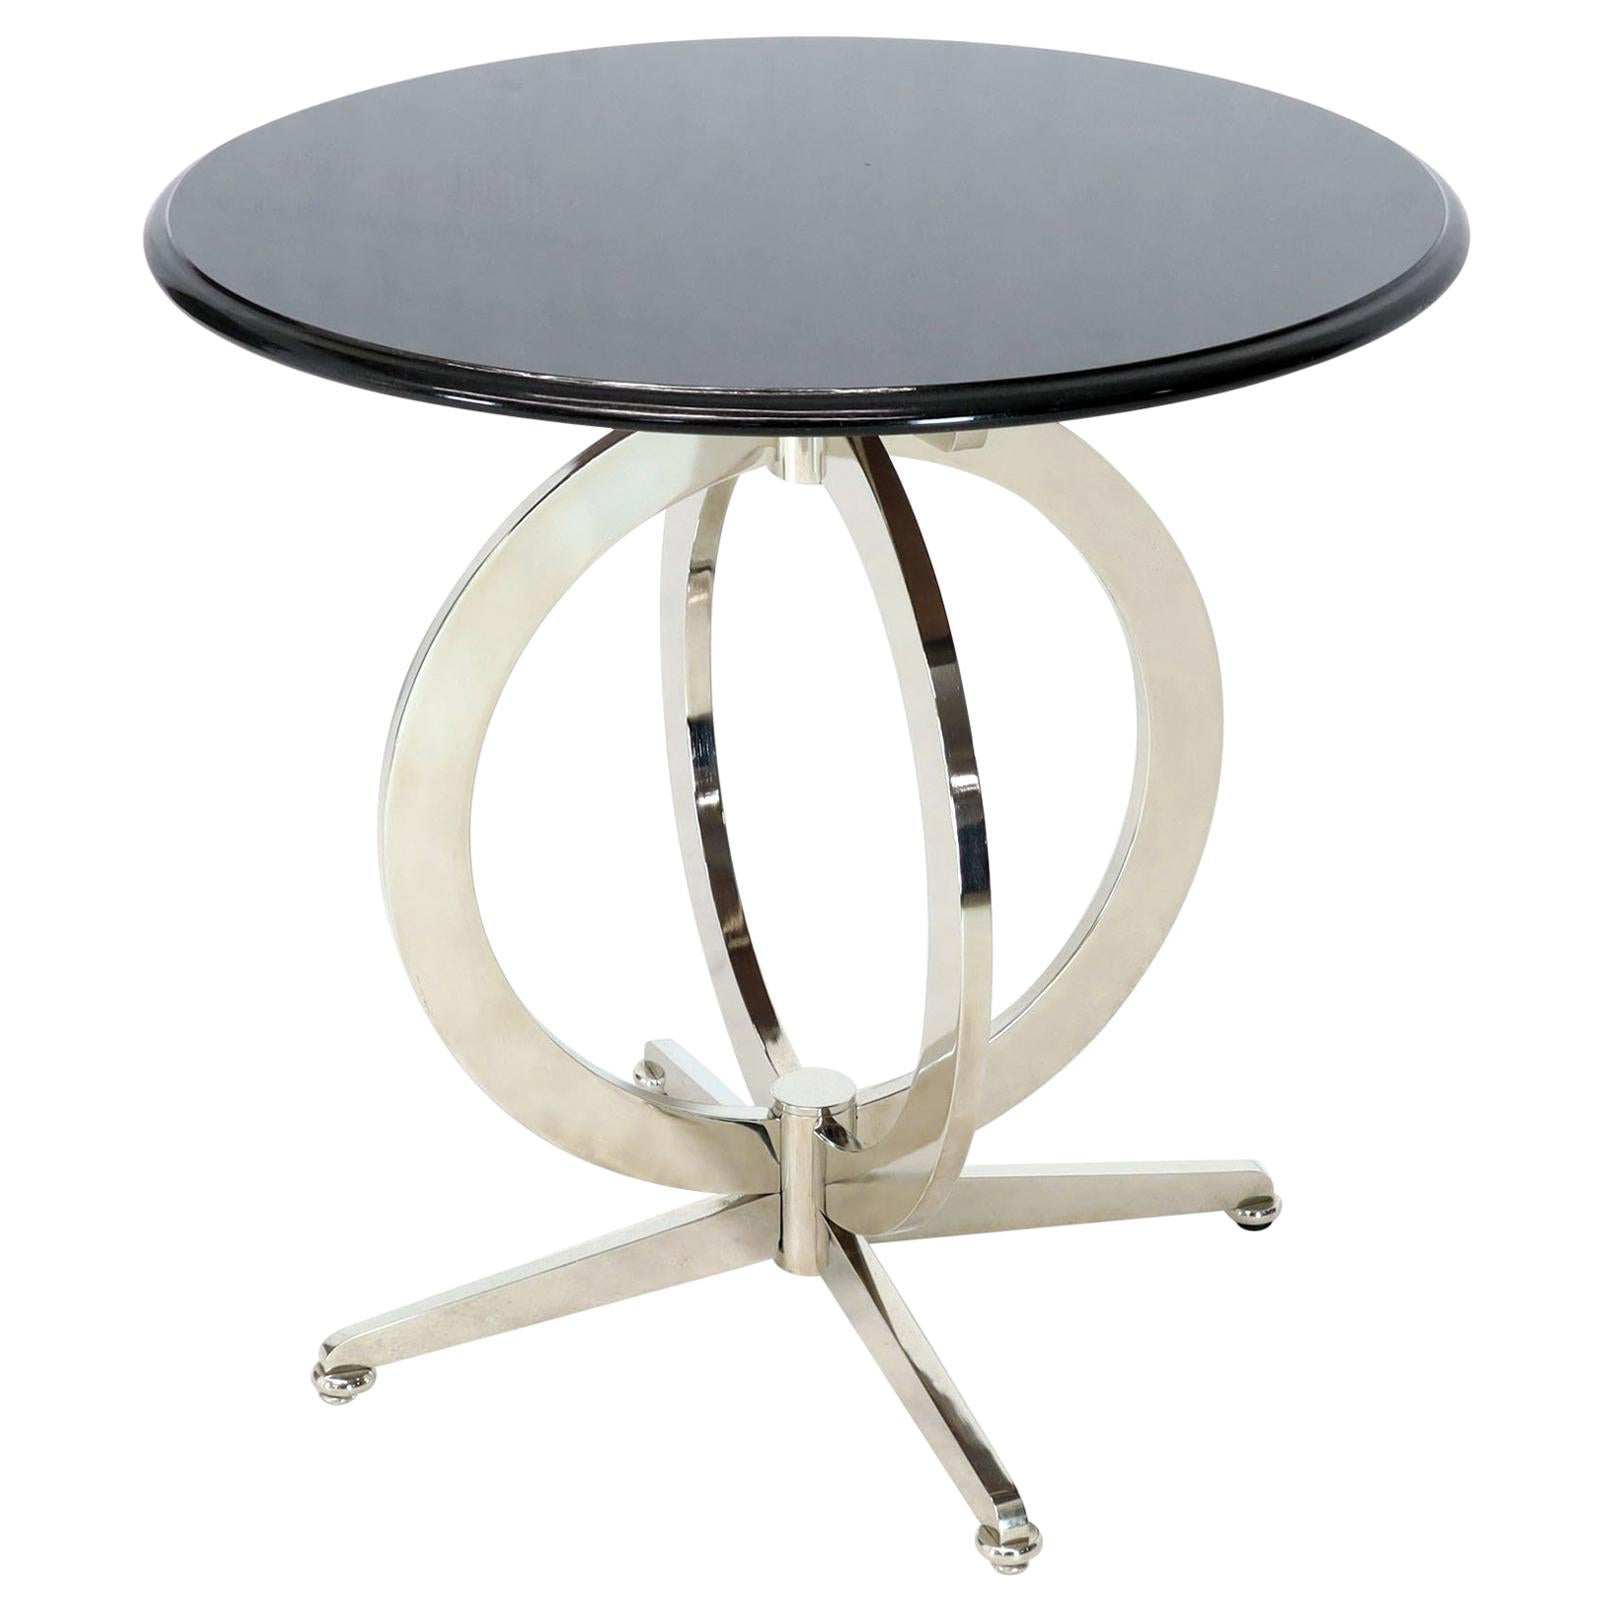 Heavy Gage Chrome Plated Steel Base Marble Top Round Gueridon  Cafe Table Stand For Sale